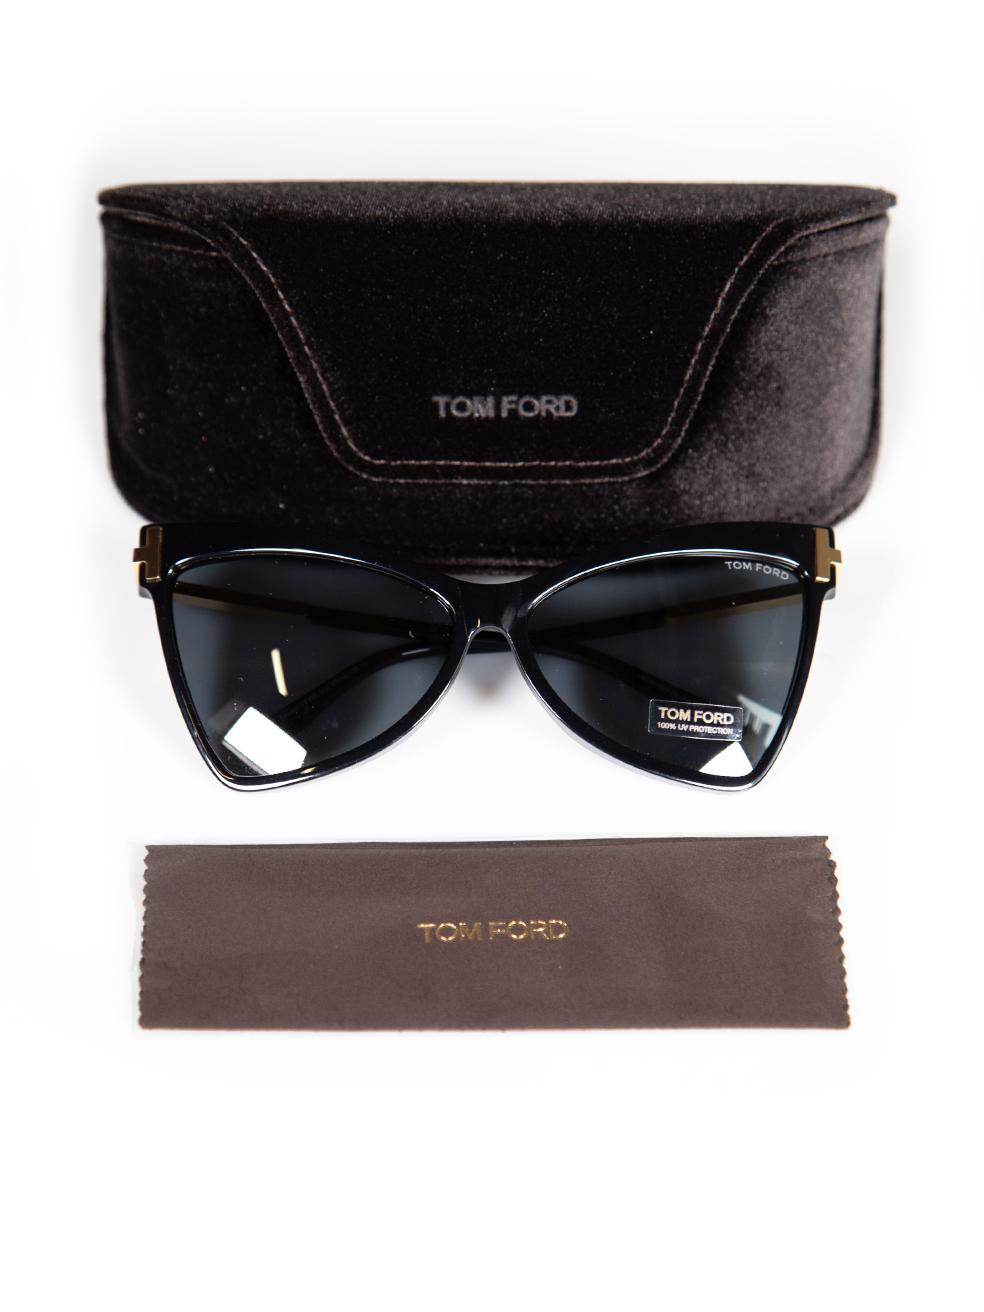 Tom Ford Tallulah Shiny Black Butterfly Sunglasses For Sale 4